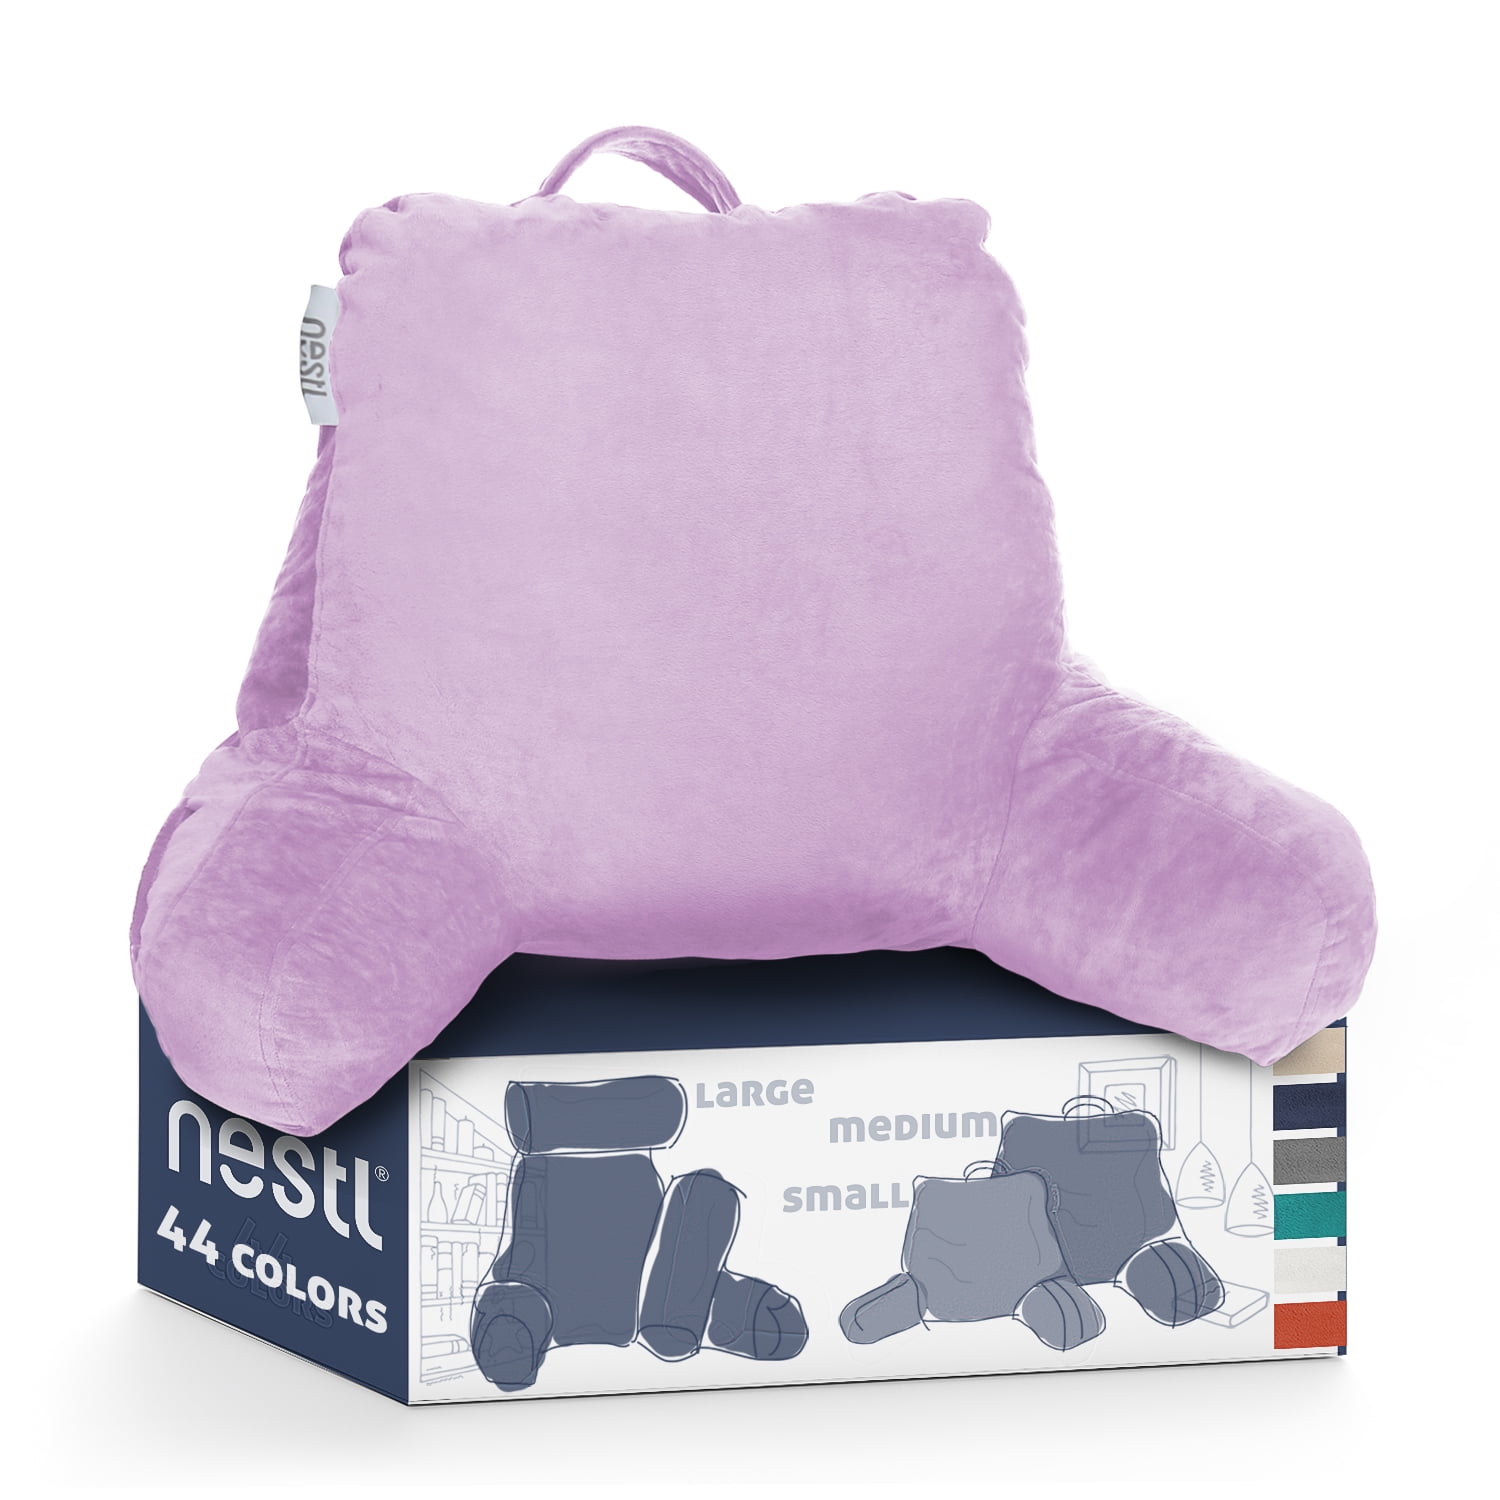 Nestl Reading Pillow Petite Bed Rest Pillow with Arms for Kids & Young Adults Premium Shredded Memory Foam TV Pillow Purple Eggplant